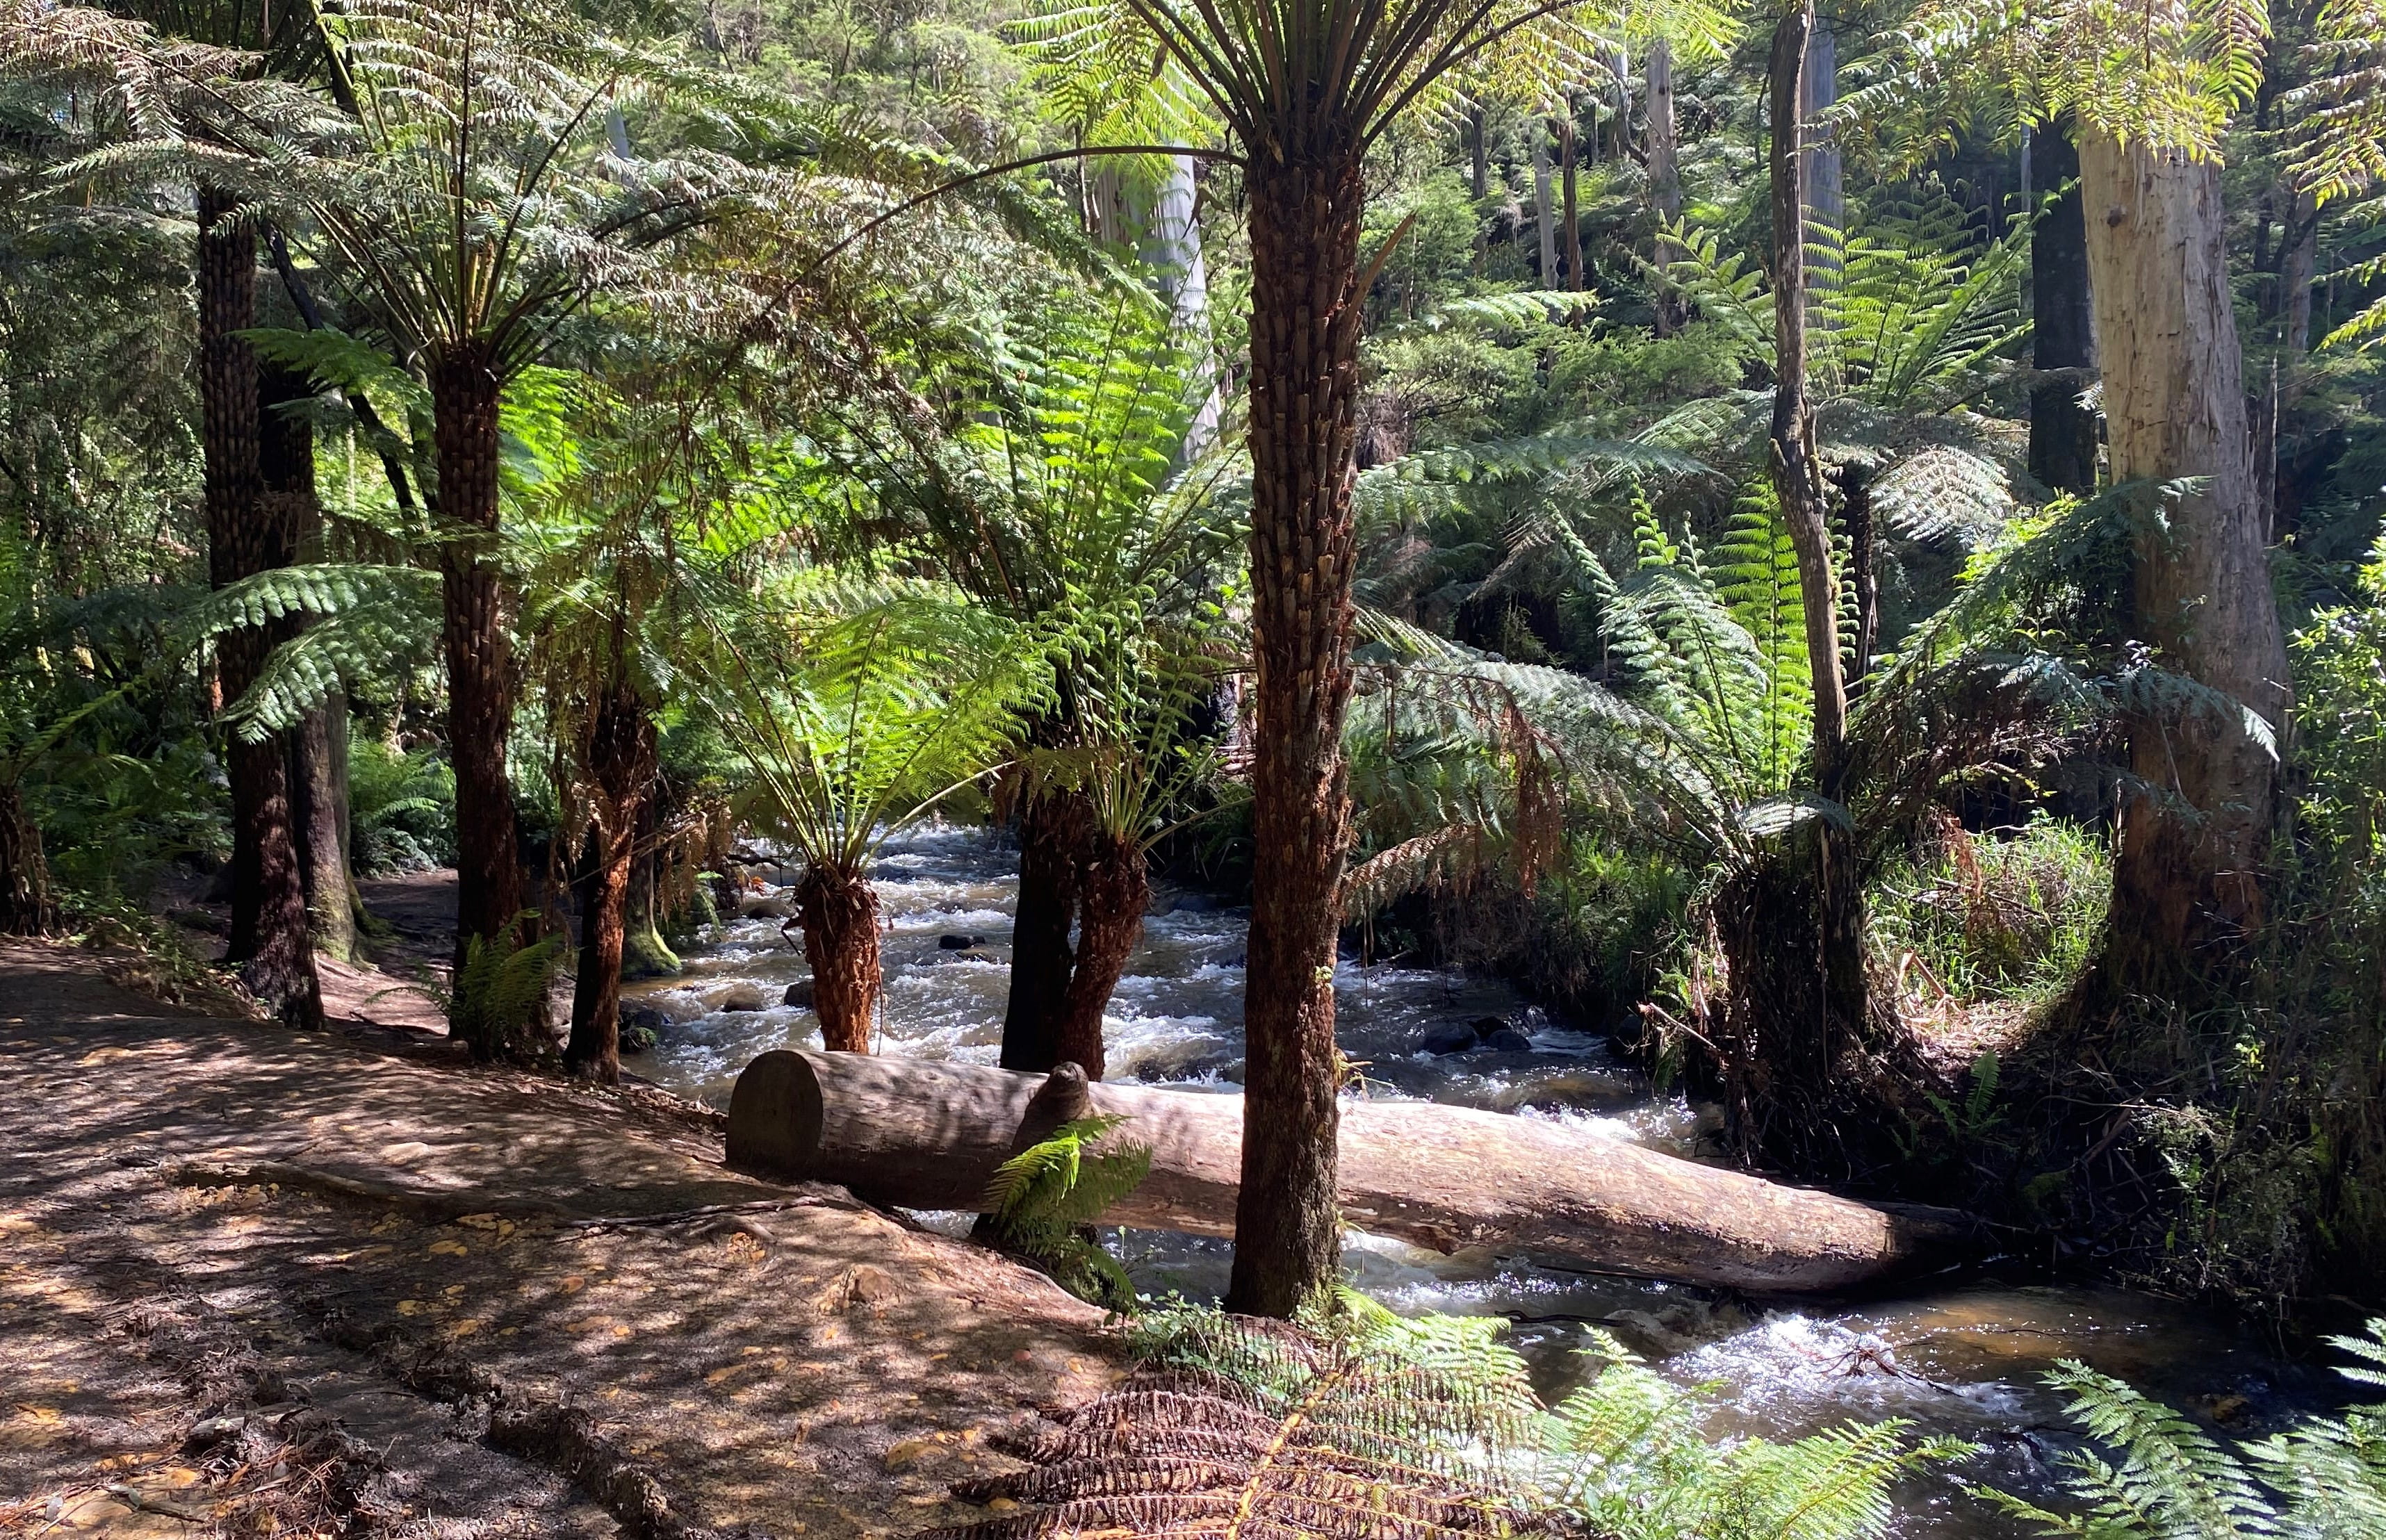 Fern trees along the riverbank at the Redwoods Forest site in East Warburton